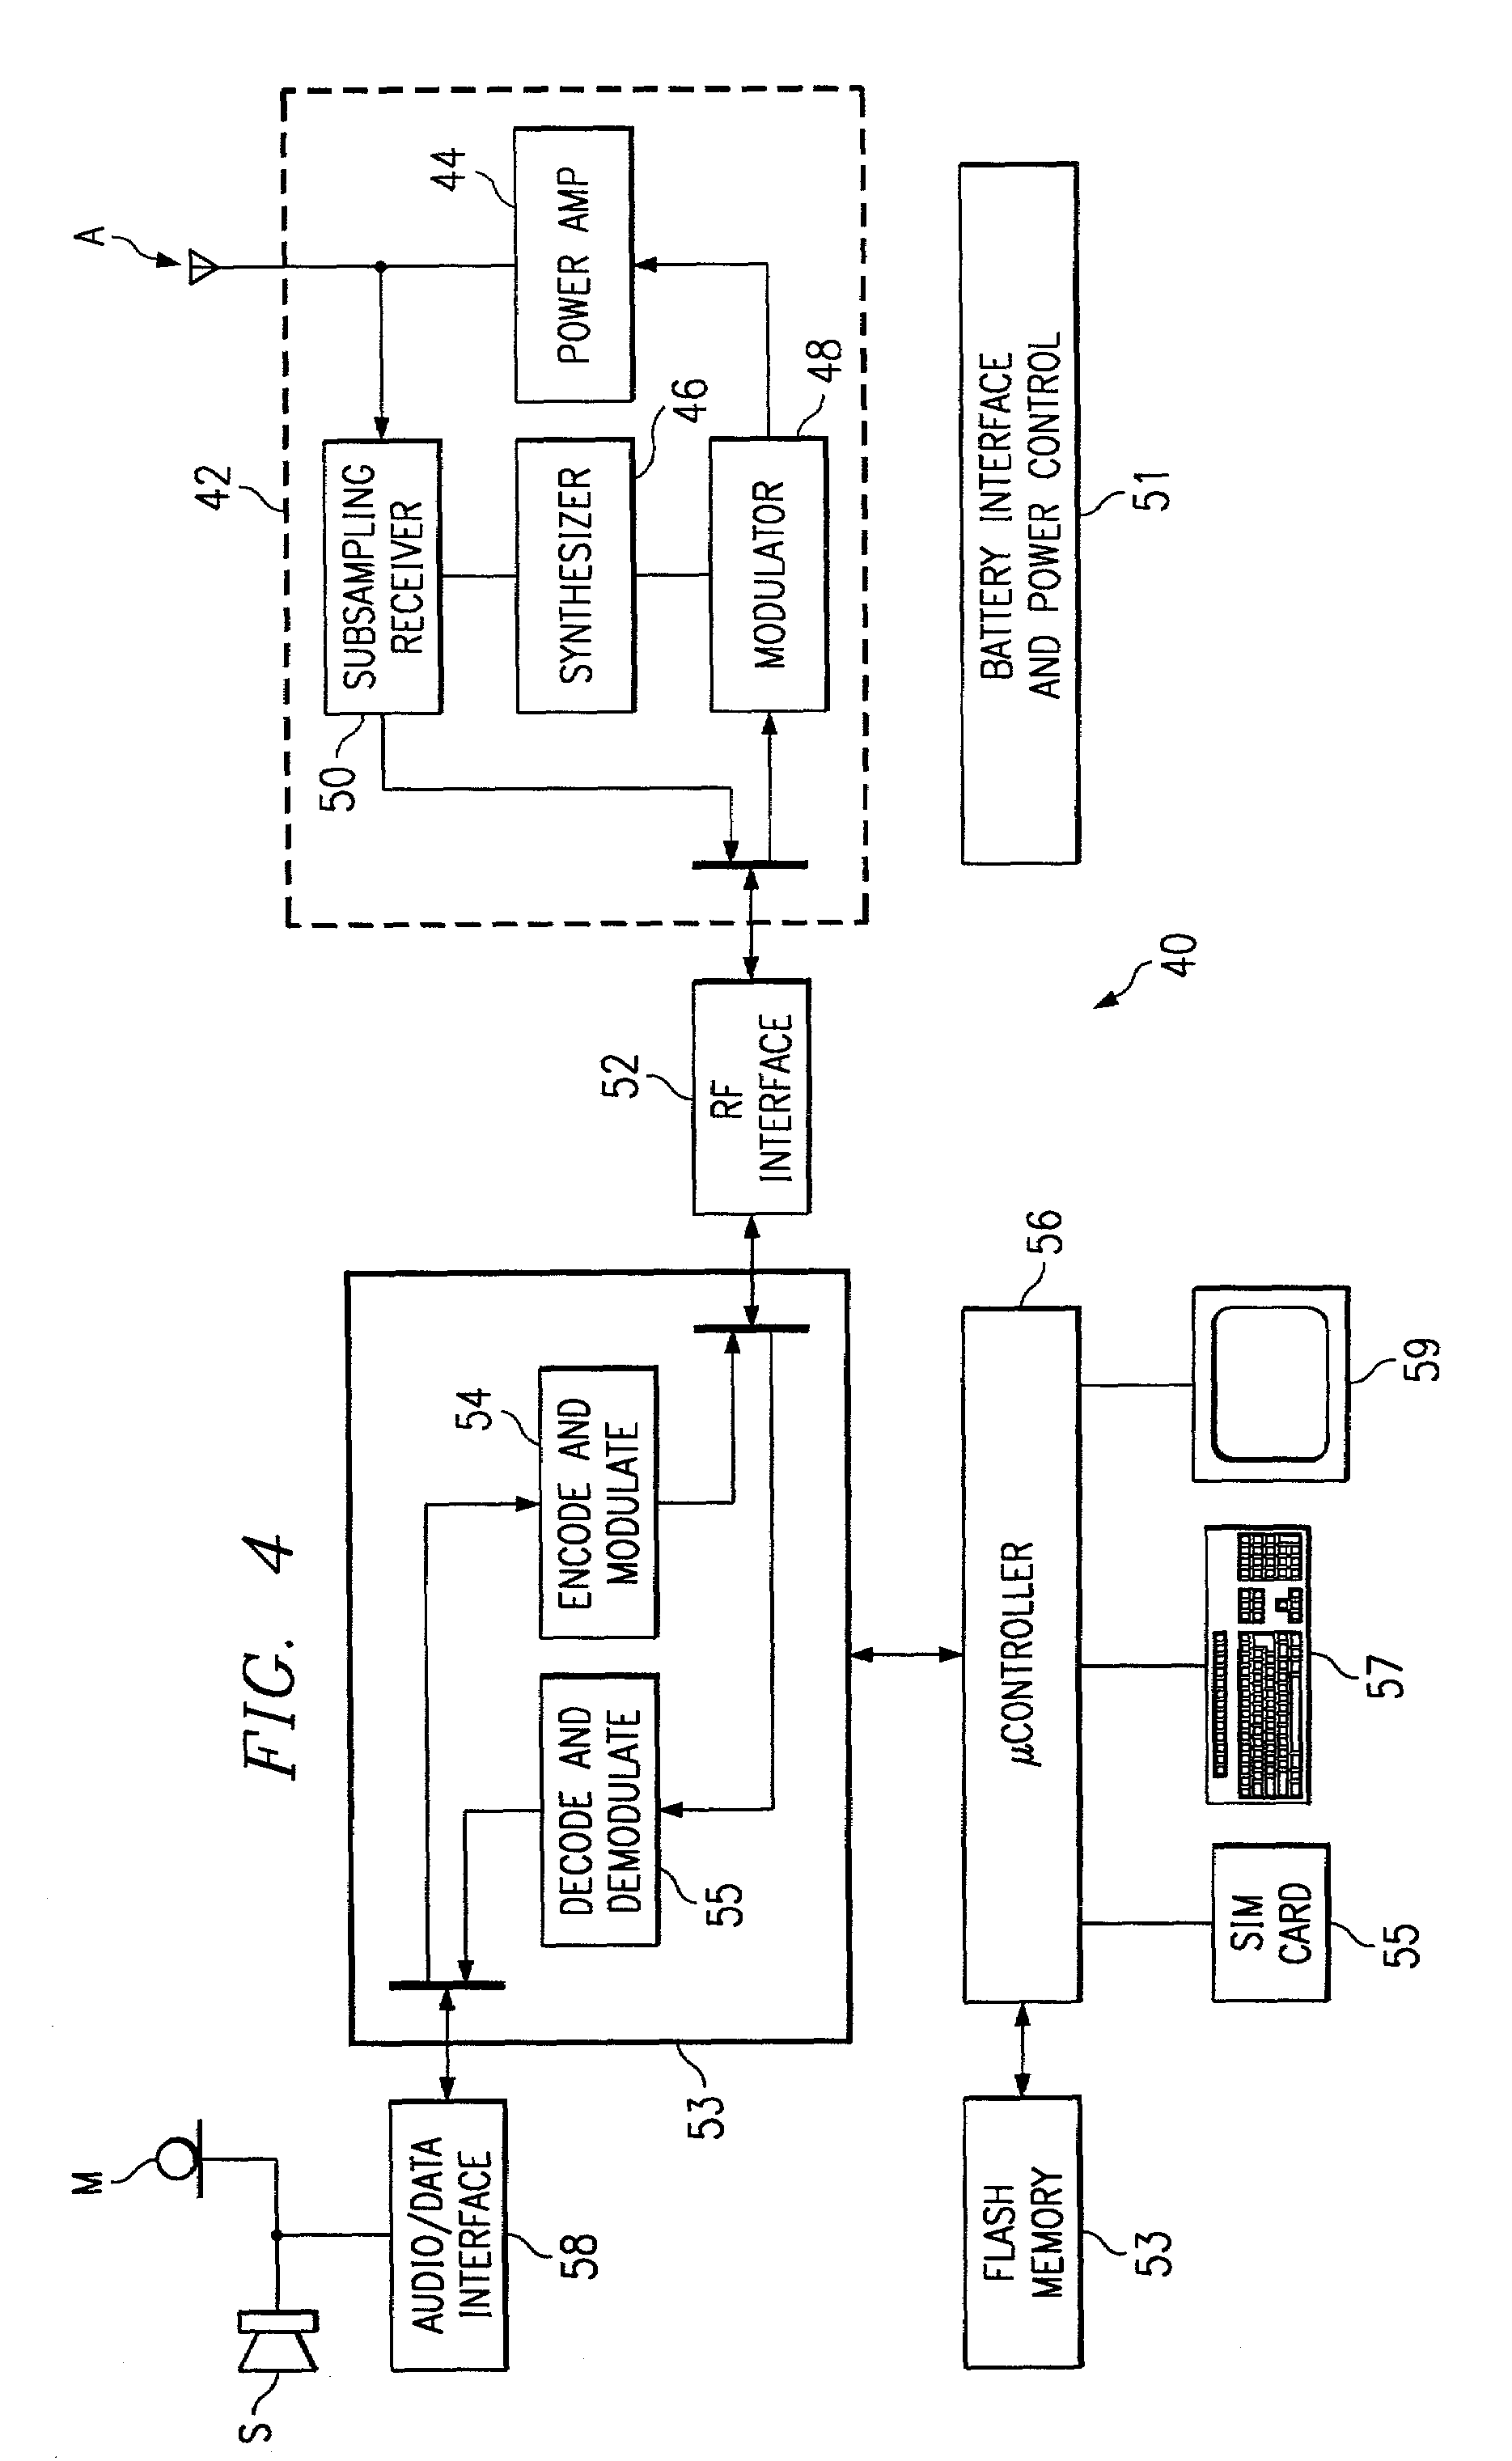 Subsampling RF receiver architecture